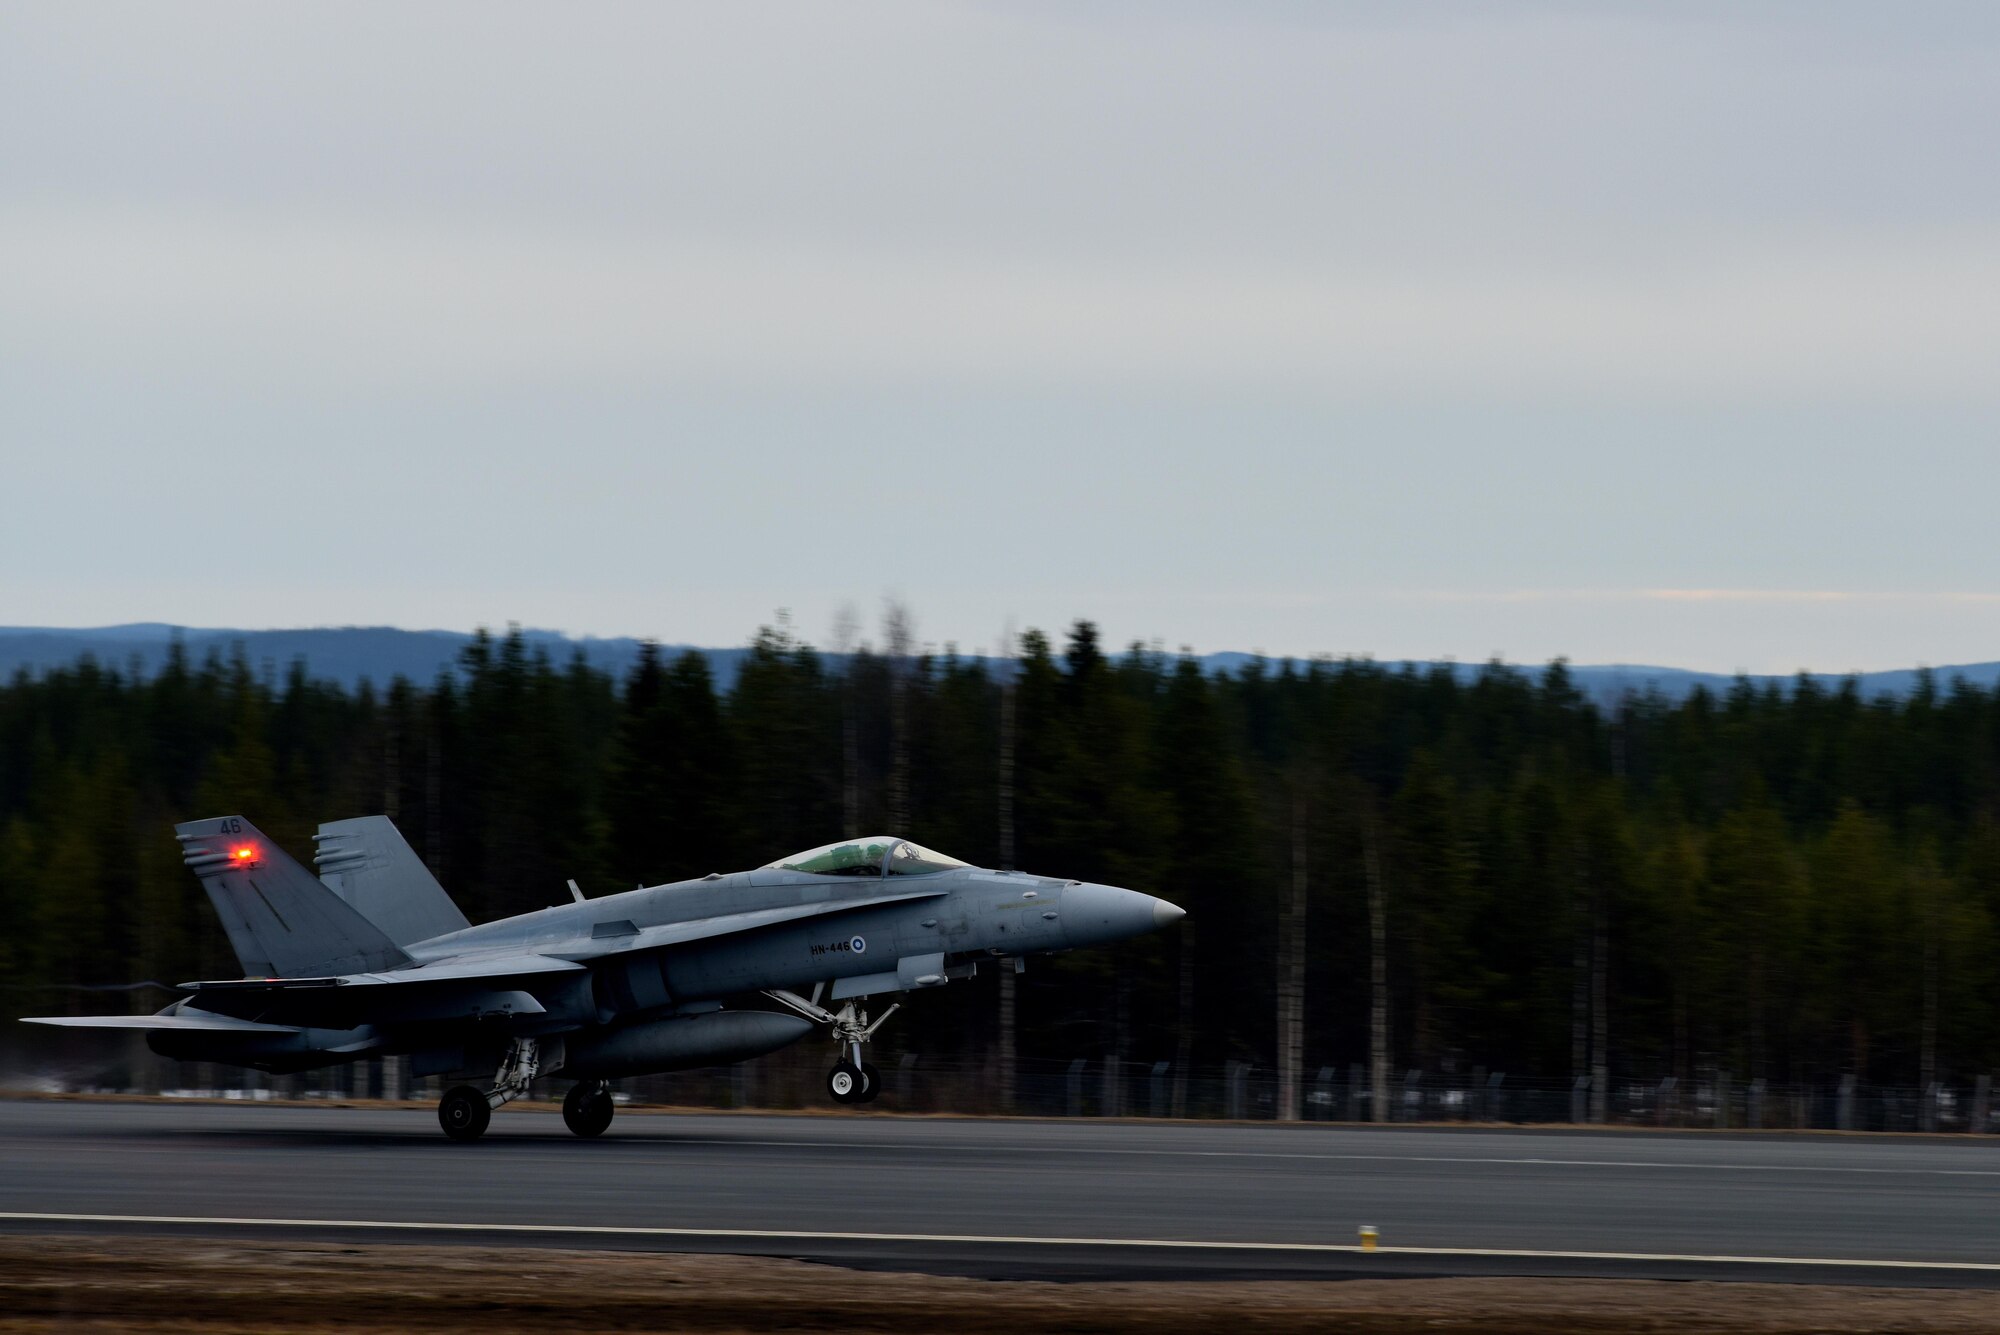 A Finnish F/A-18 Hornet takes off at Rovaniemi Air Base, Finland, May 22, in support of Arctic Challenge 2017. Through exercises such as ACE 17, U.S., allies and partner nations are able to build on their expertise in the air and create a force ready to respond to a crisis together. (U.S. Air Force photo/Airman 1st Class Abby L. Finkel)